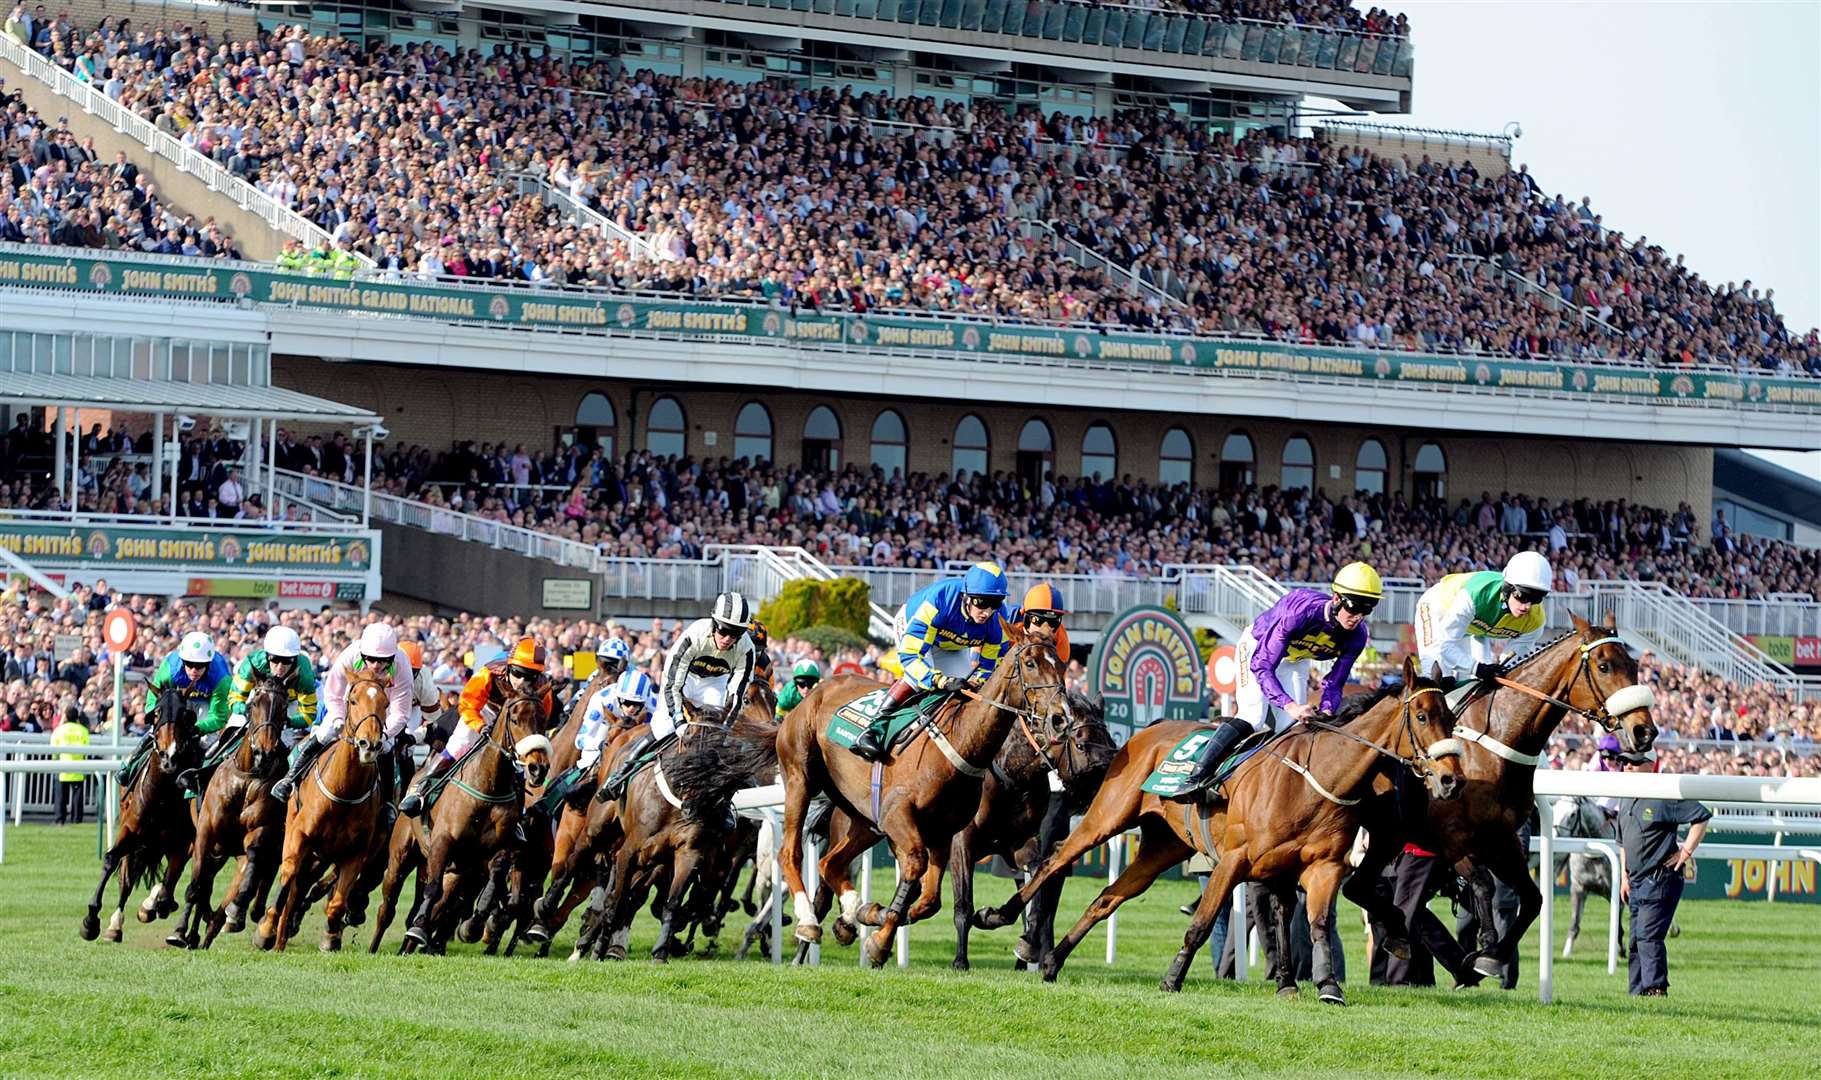 Jockey Jason Maguire on Ballabriggs (right) leads the pack in the 2011 Grand National. Picture courtesy of Liverpool Echo